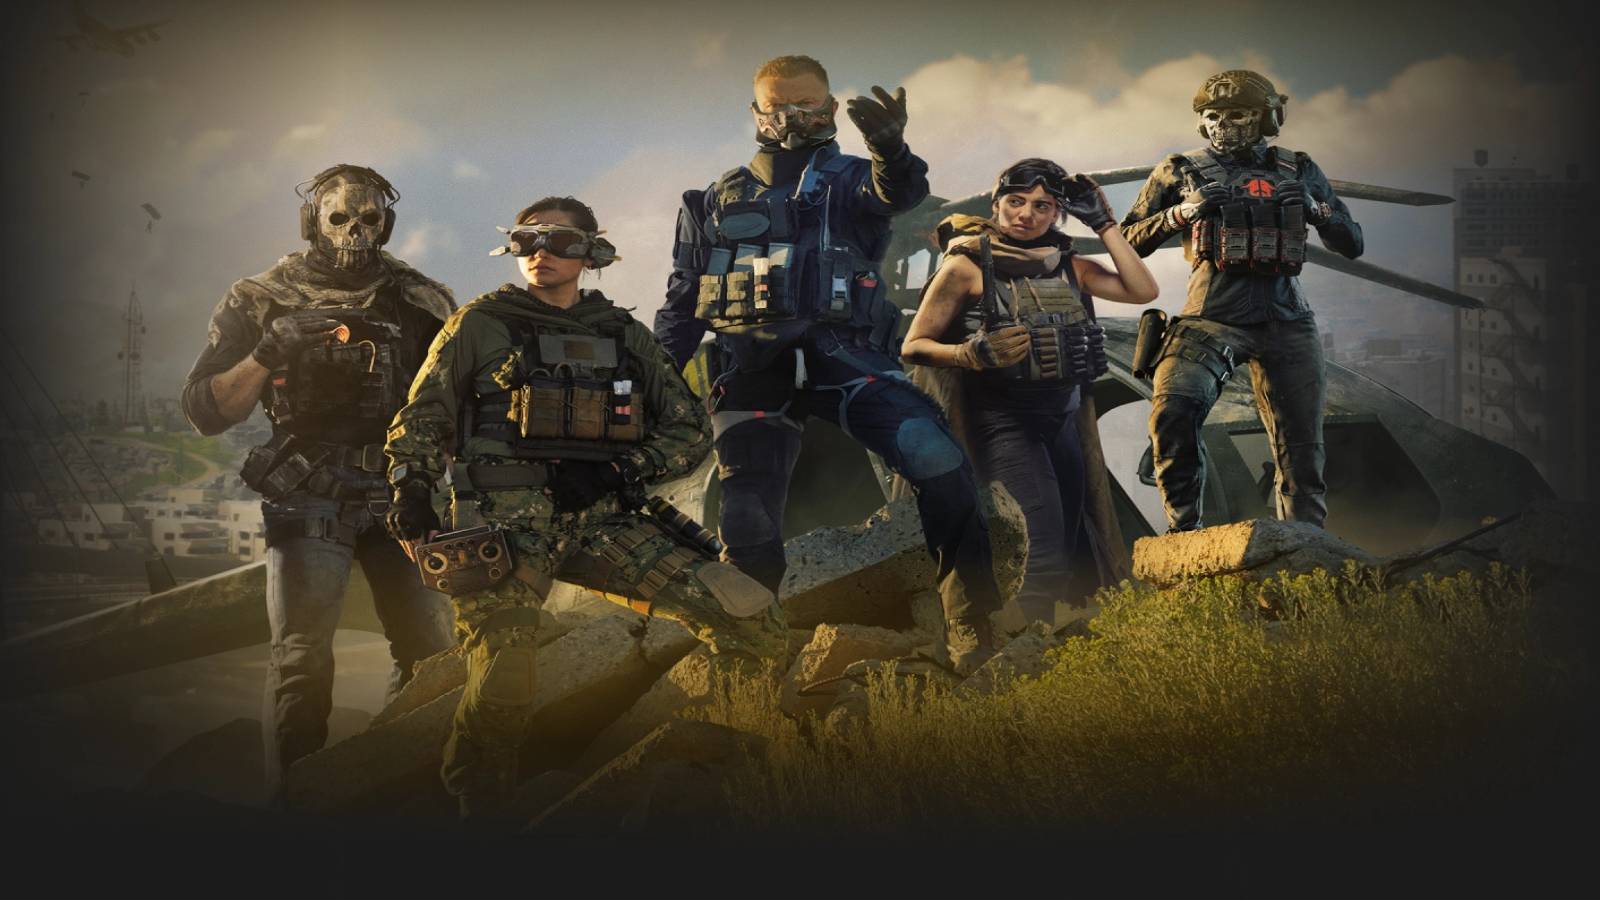 Warzone characters posing together